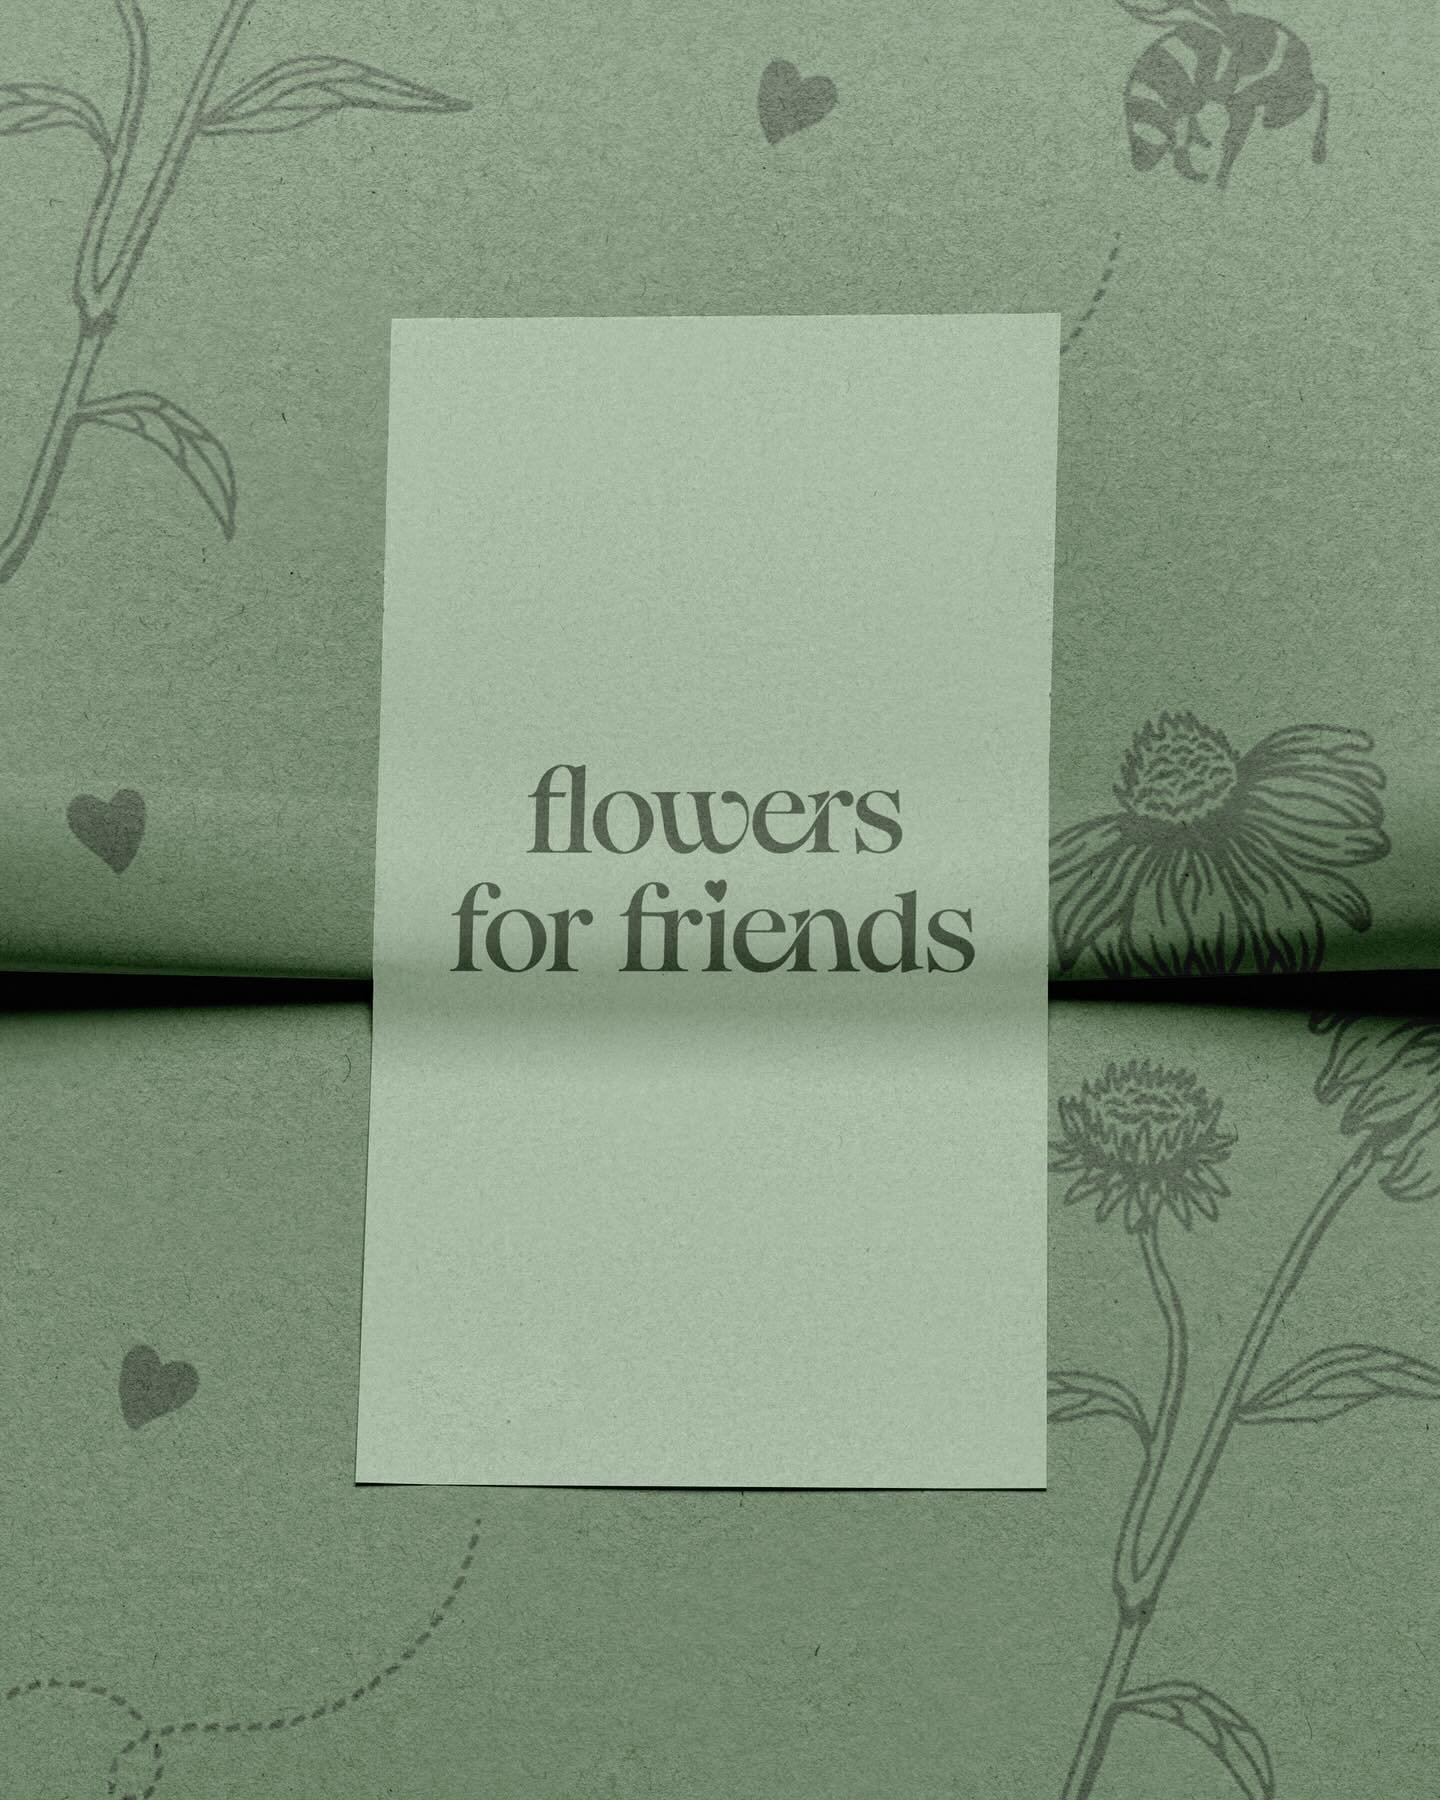 Wildly free branding for @flowersforfriends_nz 

Naturally blooming with loooovve 💚

Nellie is a florist based in Waikato, NZ, and she got in touch for a new brand for her blossoming business. 

Alongside bouquets and weddings, she&rsquo;s also a ta